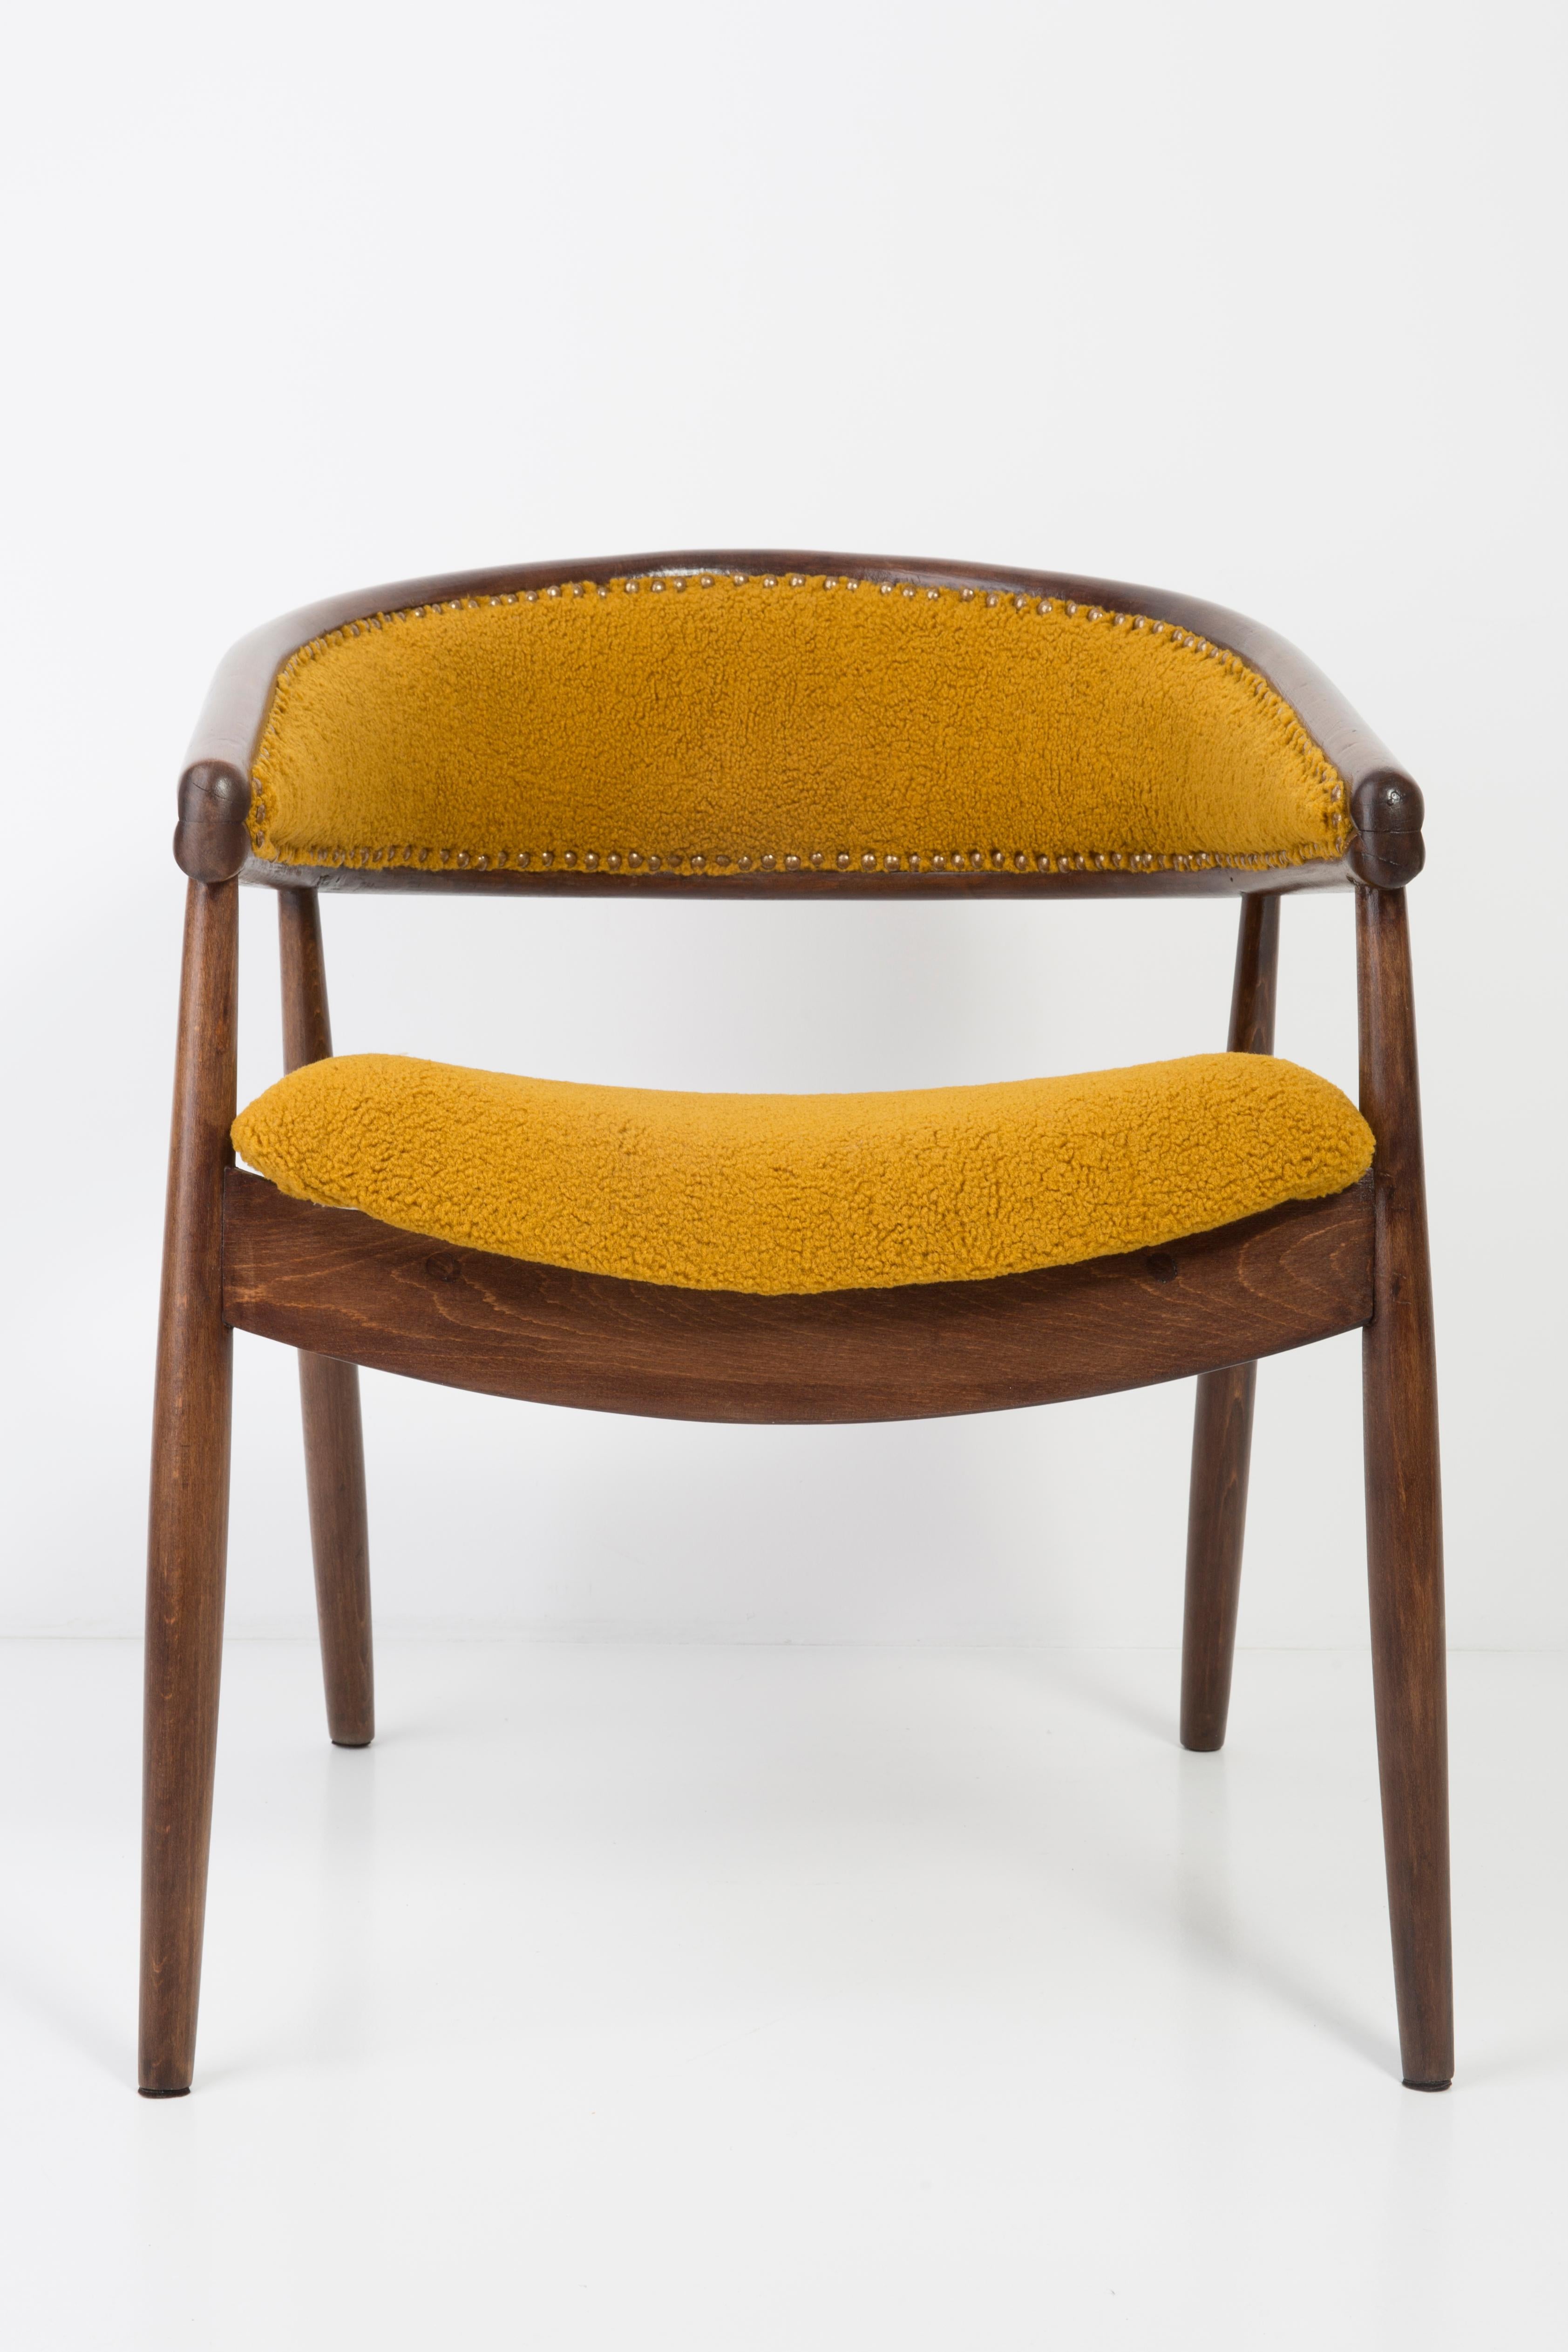 Set of James Mont Bent Beech Armchairs and Table, Yellow Ochra Boucle, 1960s For Sale 2